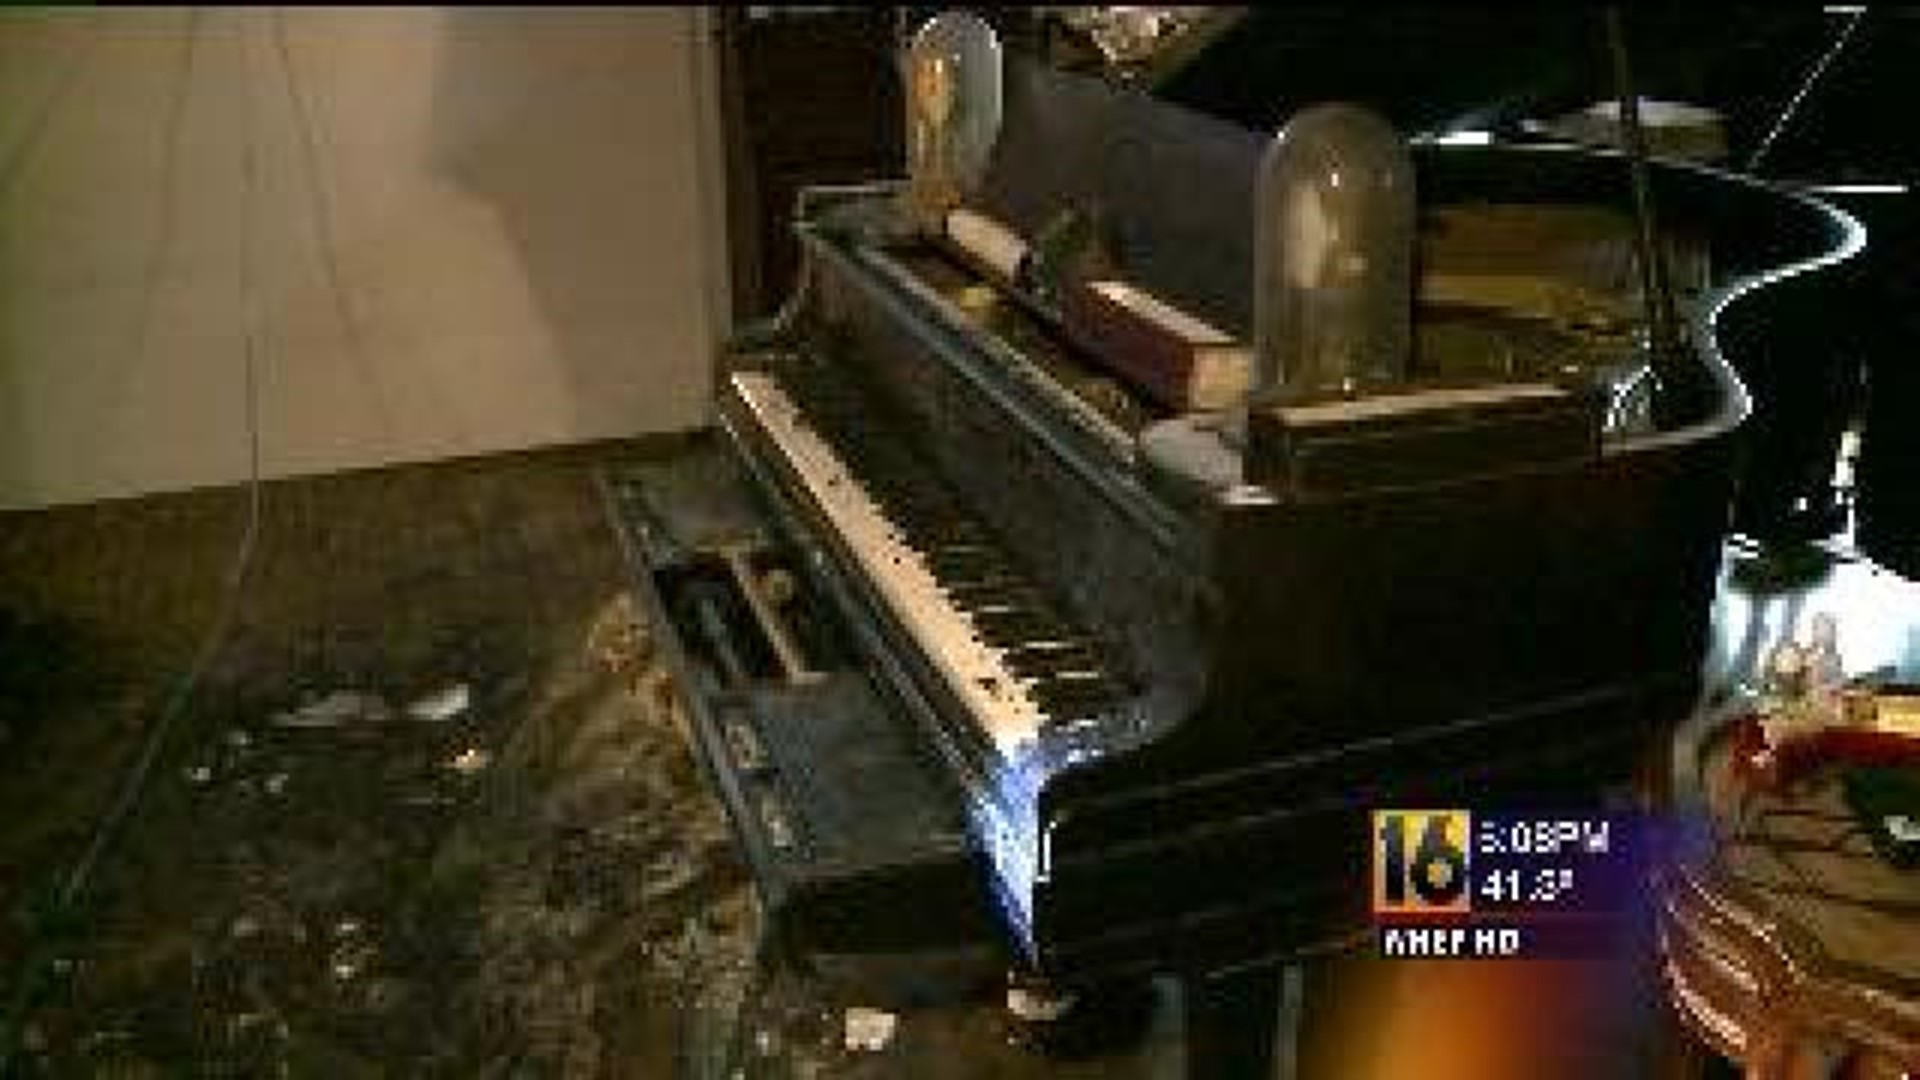 Antique Pianos Destroyed in Fire